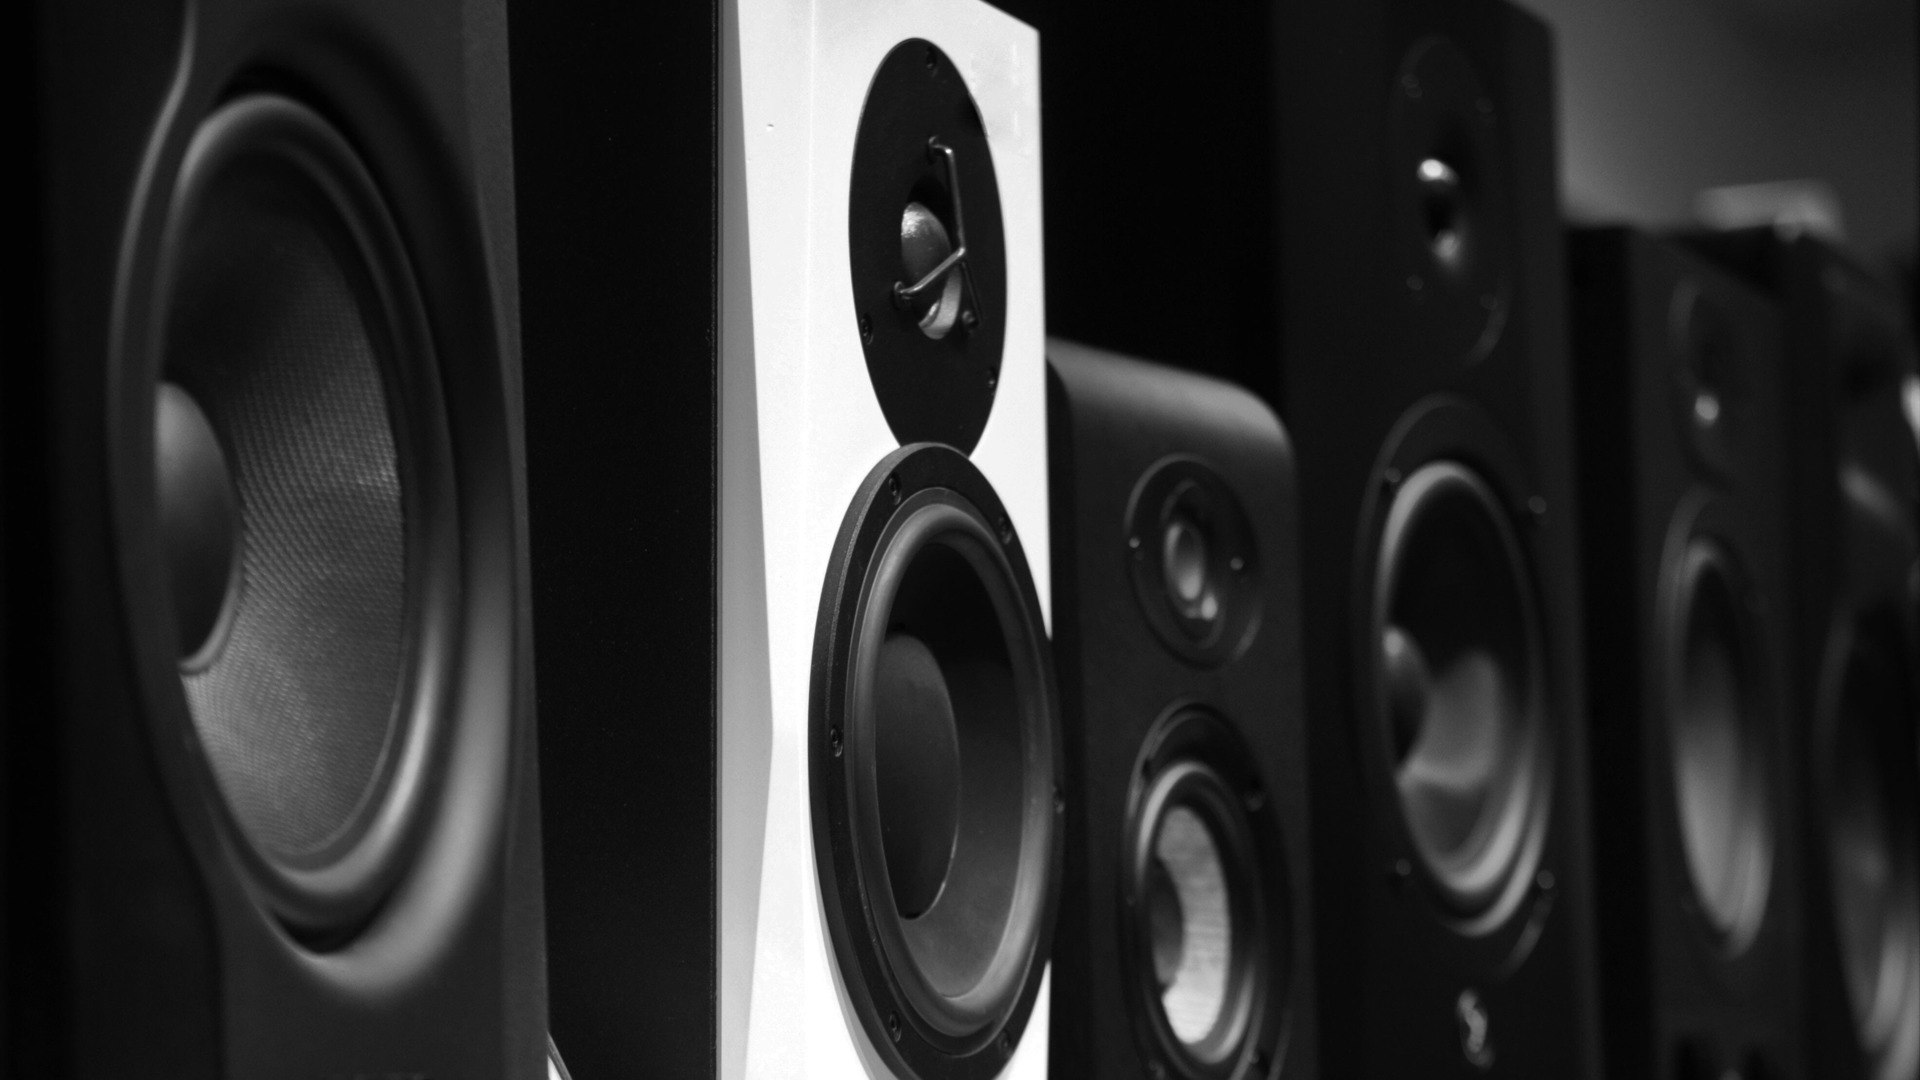 Black and white photo of speakers